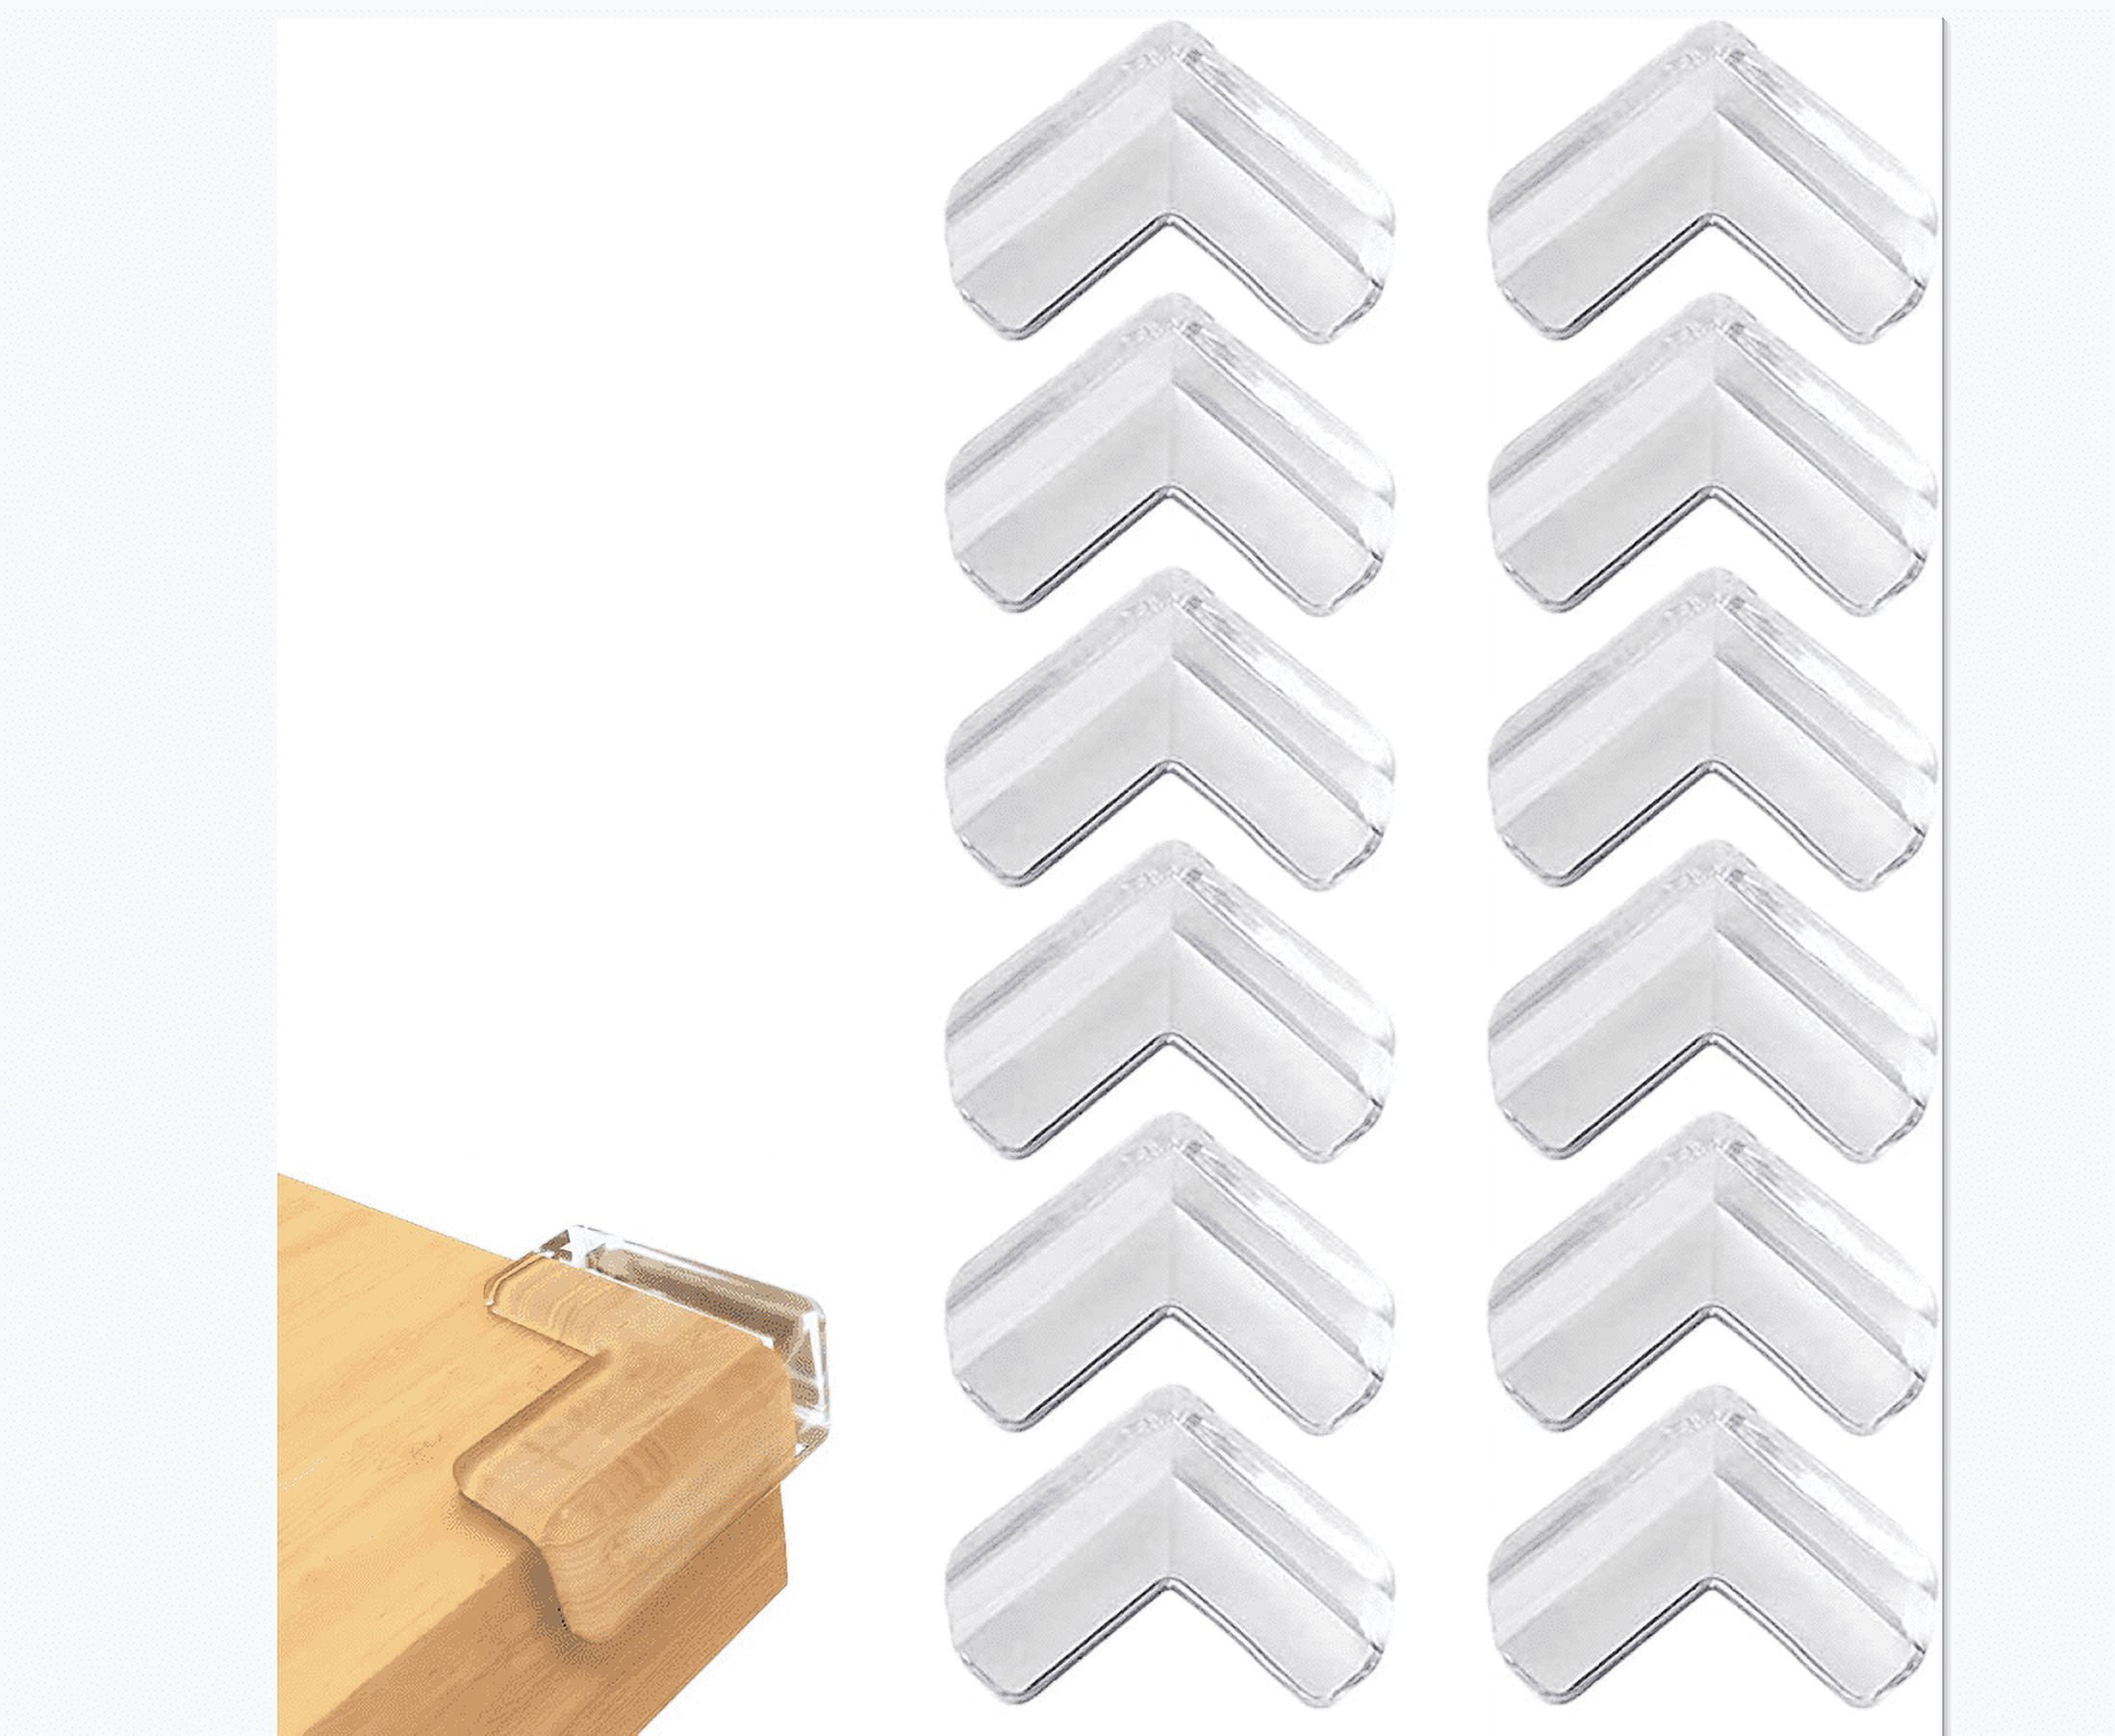  (Large 12 PCS) Desk Corner Protector, Corner Guards, Baby  Proof Corners and Edges, Corner Covers Baby Safety, Child Corner Edge  Protectors, Child Proof Corner Guards Preferences 40 mm Large : Baby